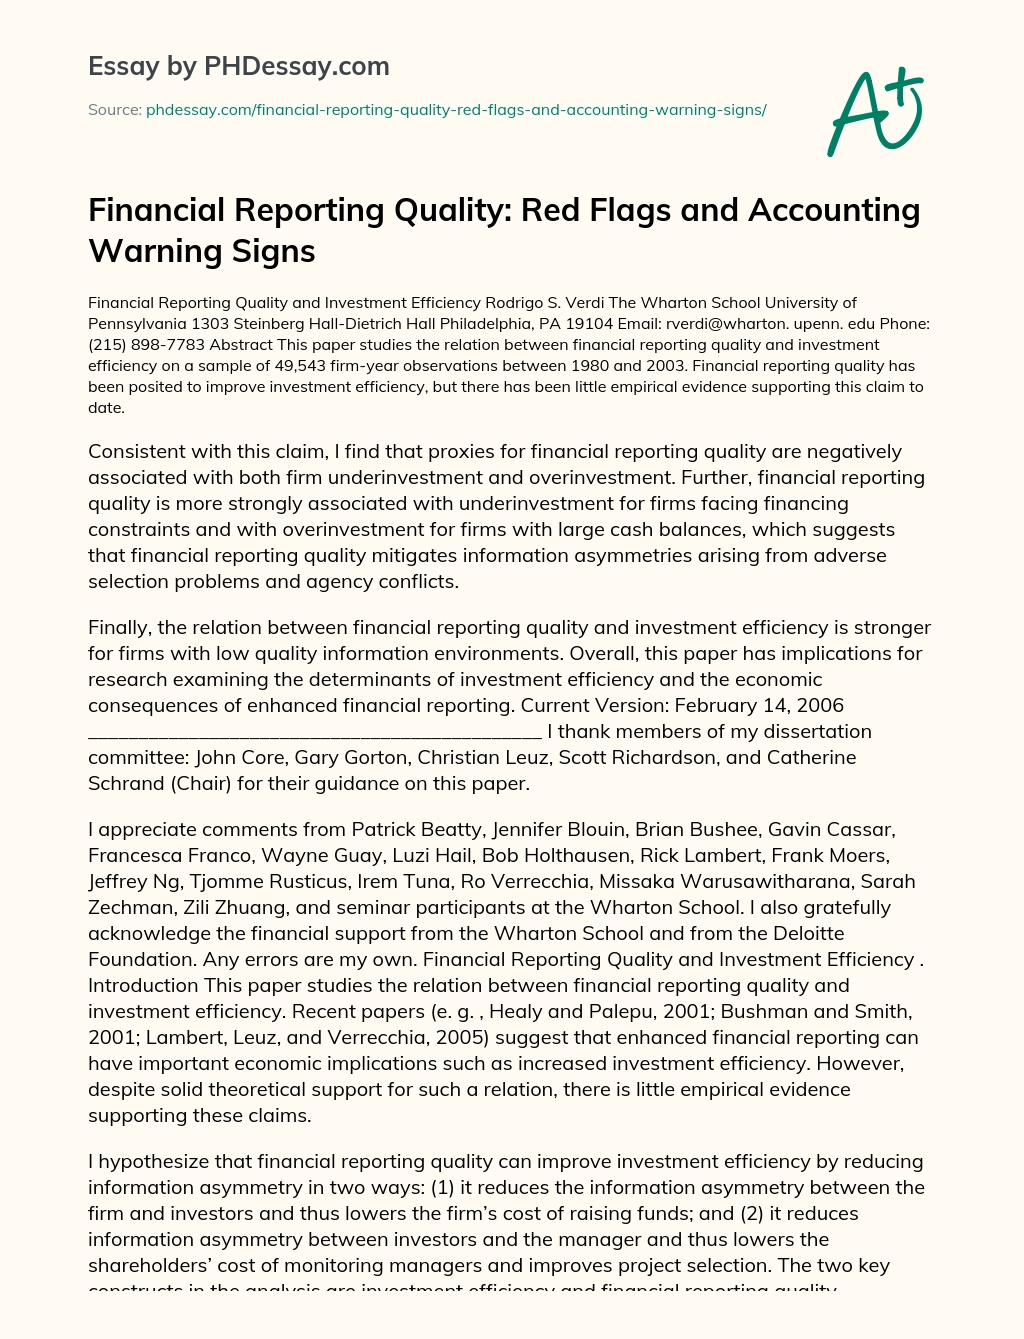 Financial Reporting Quality: Red Flags and Accounting Warning Signs essay